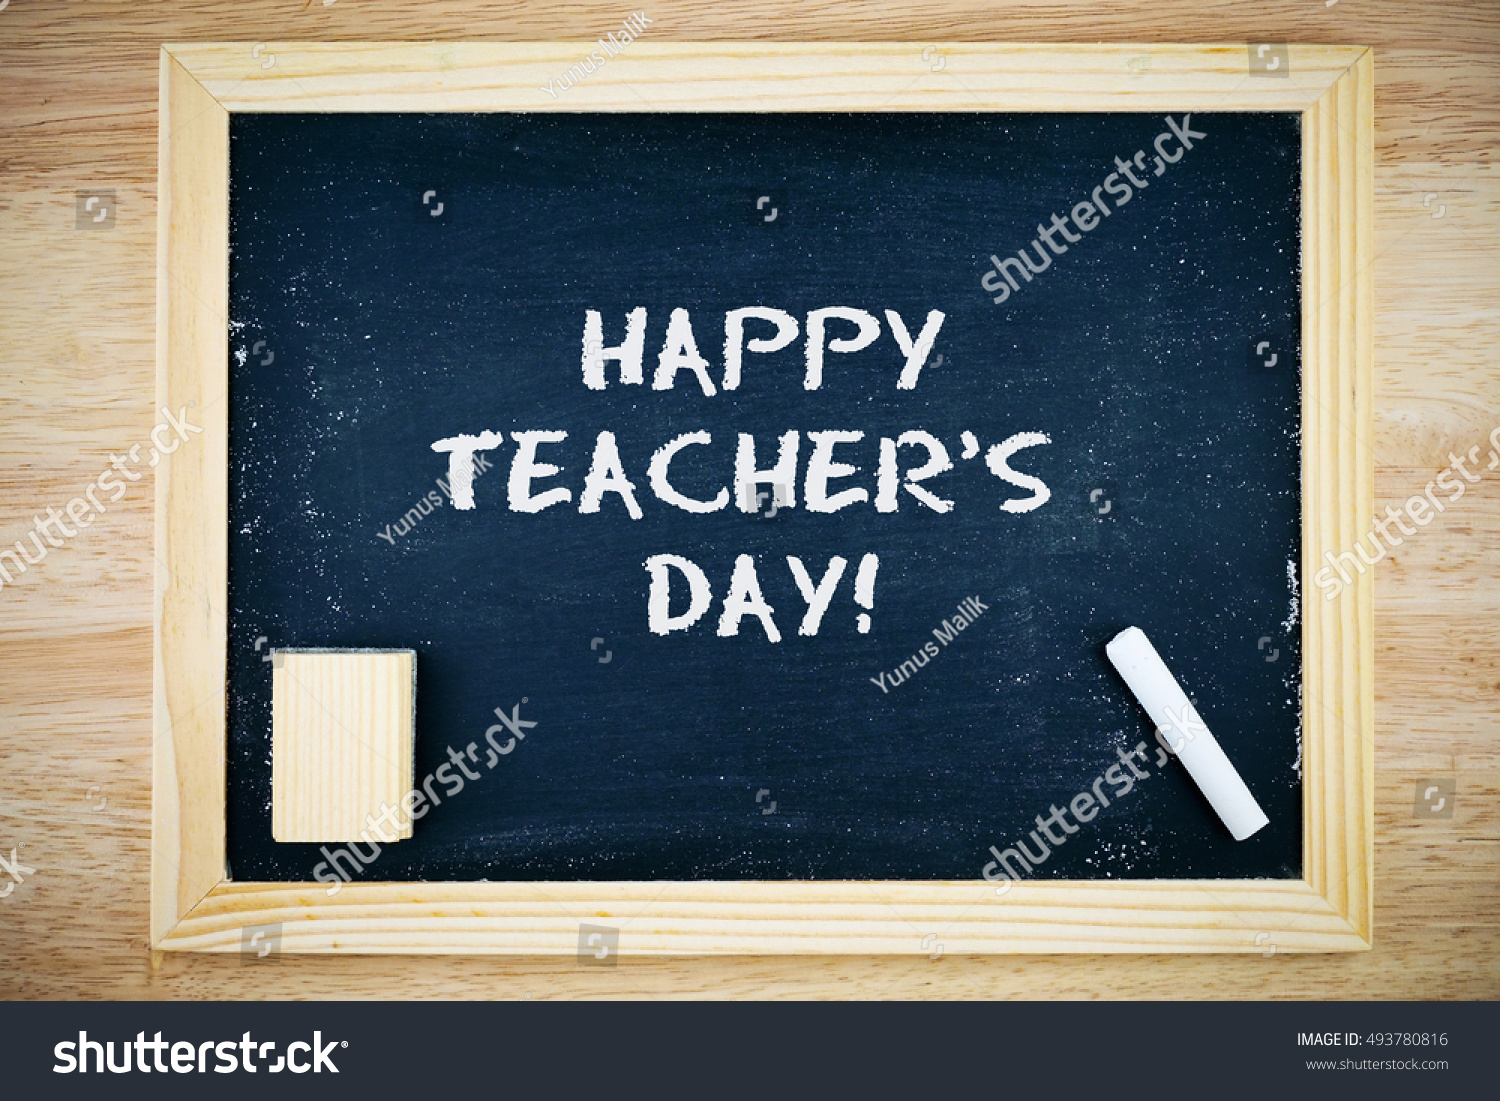 Happy Teacher's Day.. Blackboard with Happy Teacher's Day sign, white chalk and duster on wooden background #493780816